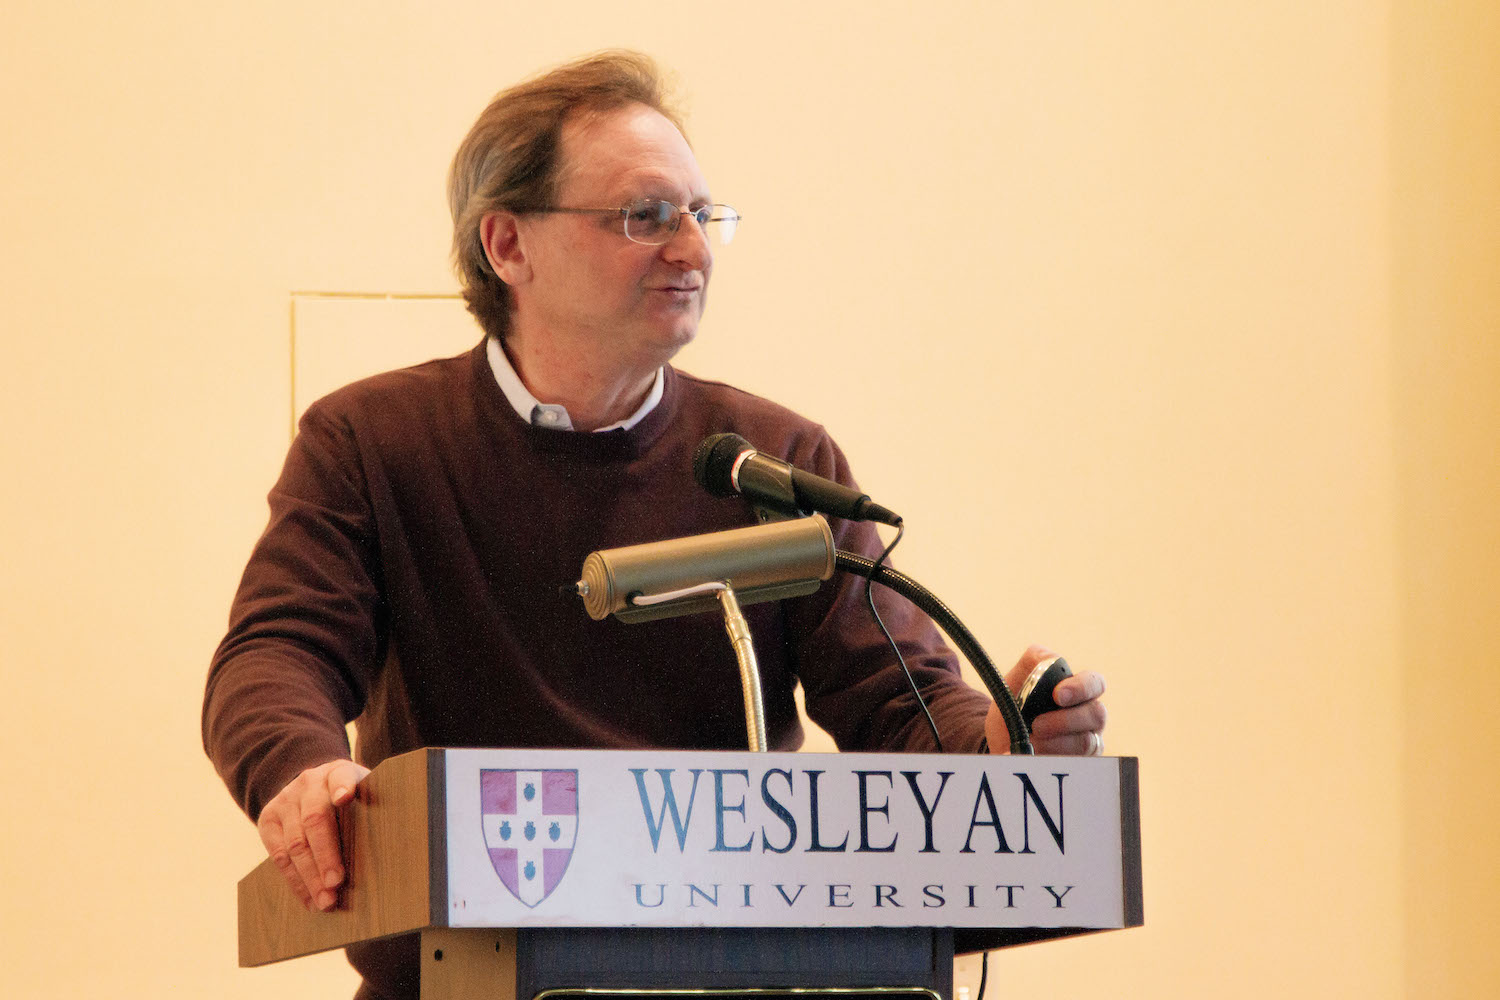 Gerard Koeppel '79, an urban historian, met with Wesleyan students and faculty on Feb. 18 to discuss "The Streets of New York."